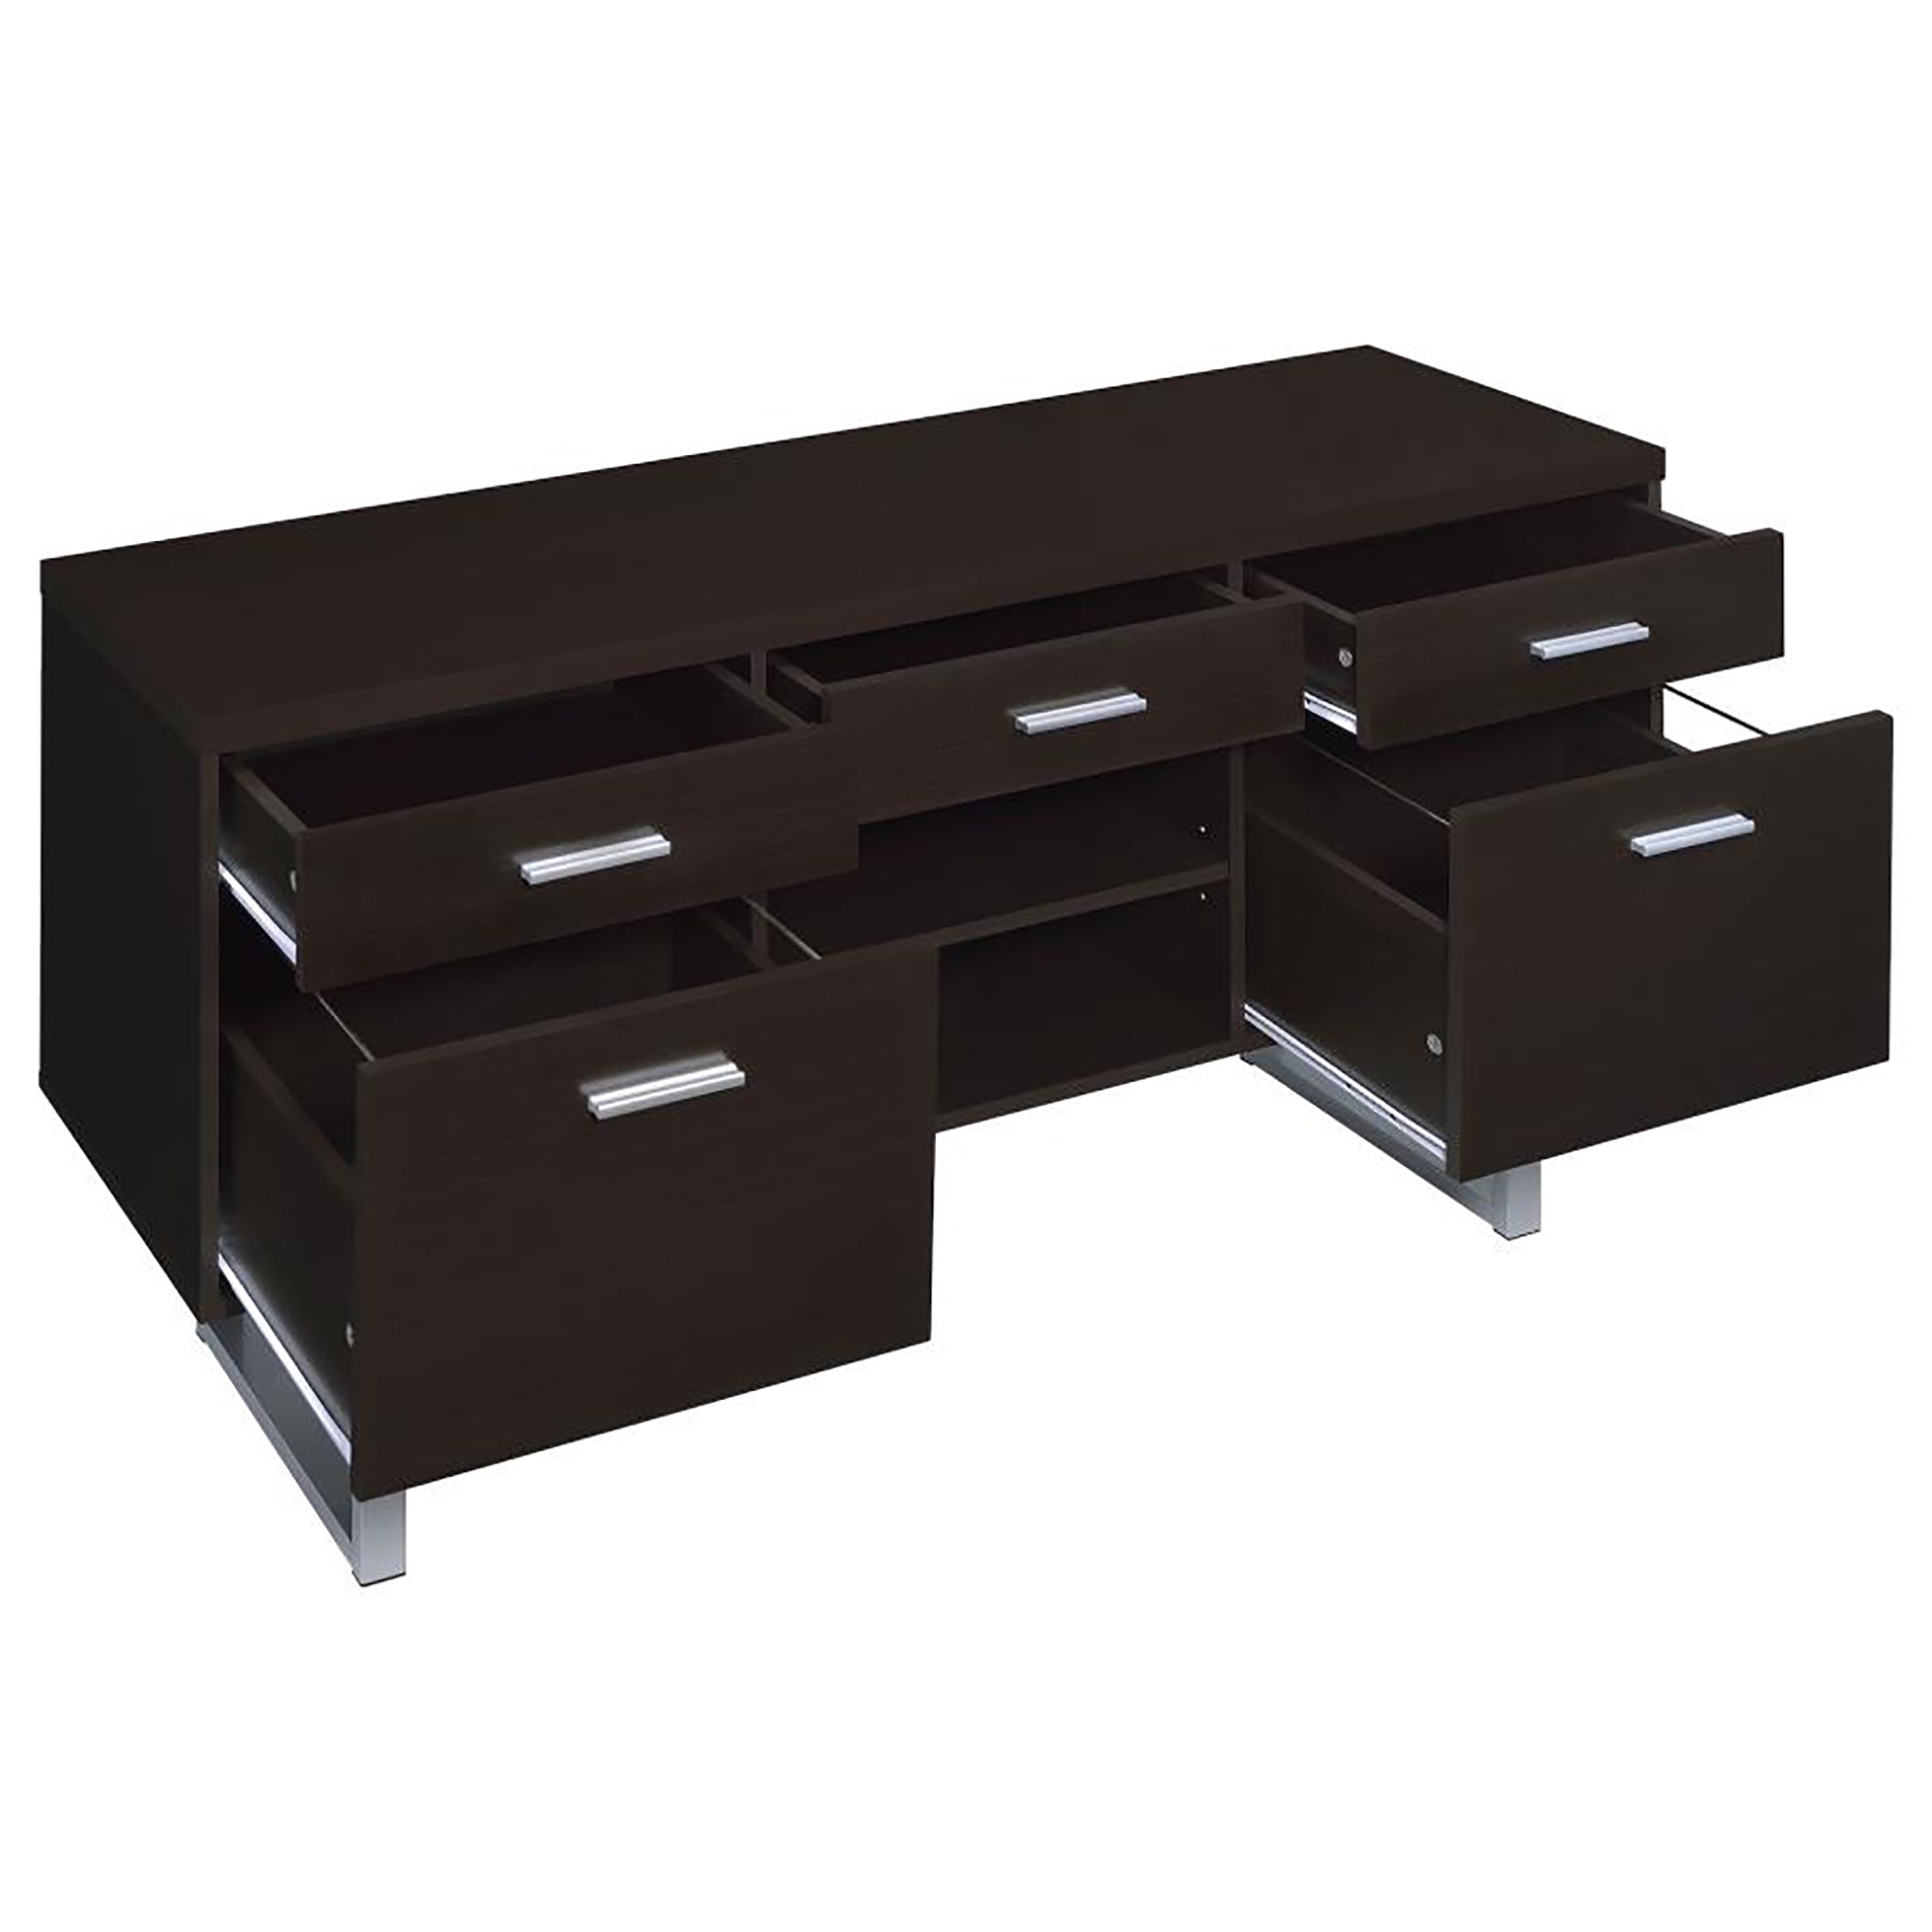 Cappuccino 5 drawer Credenza with Open Shelving